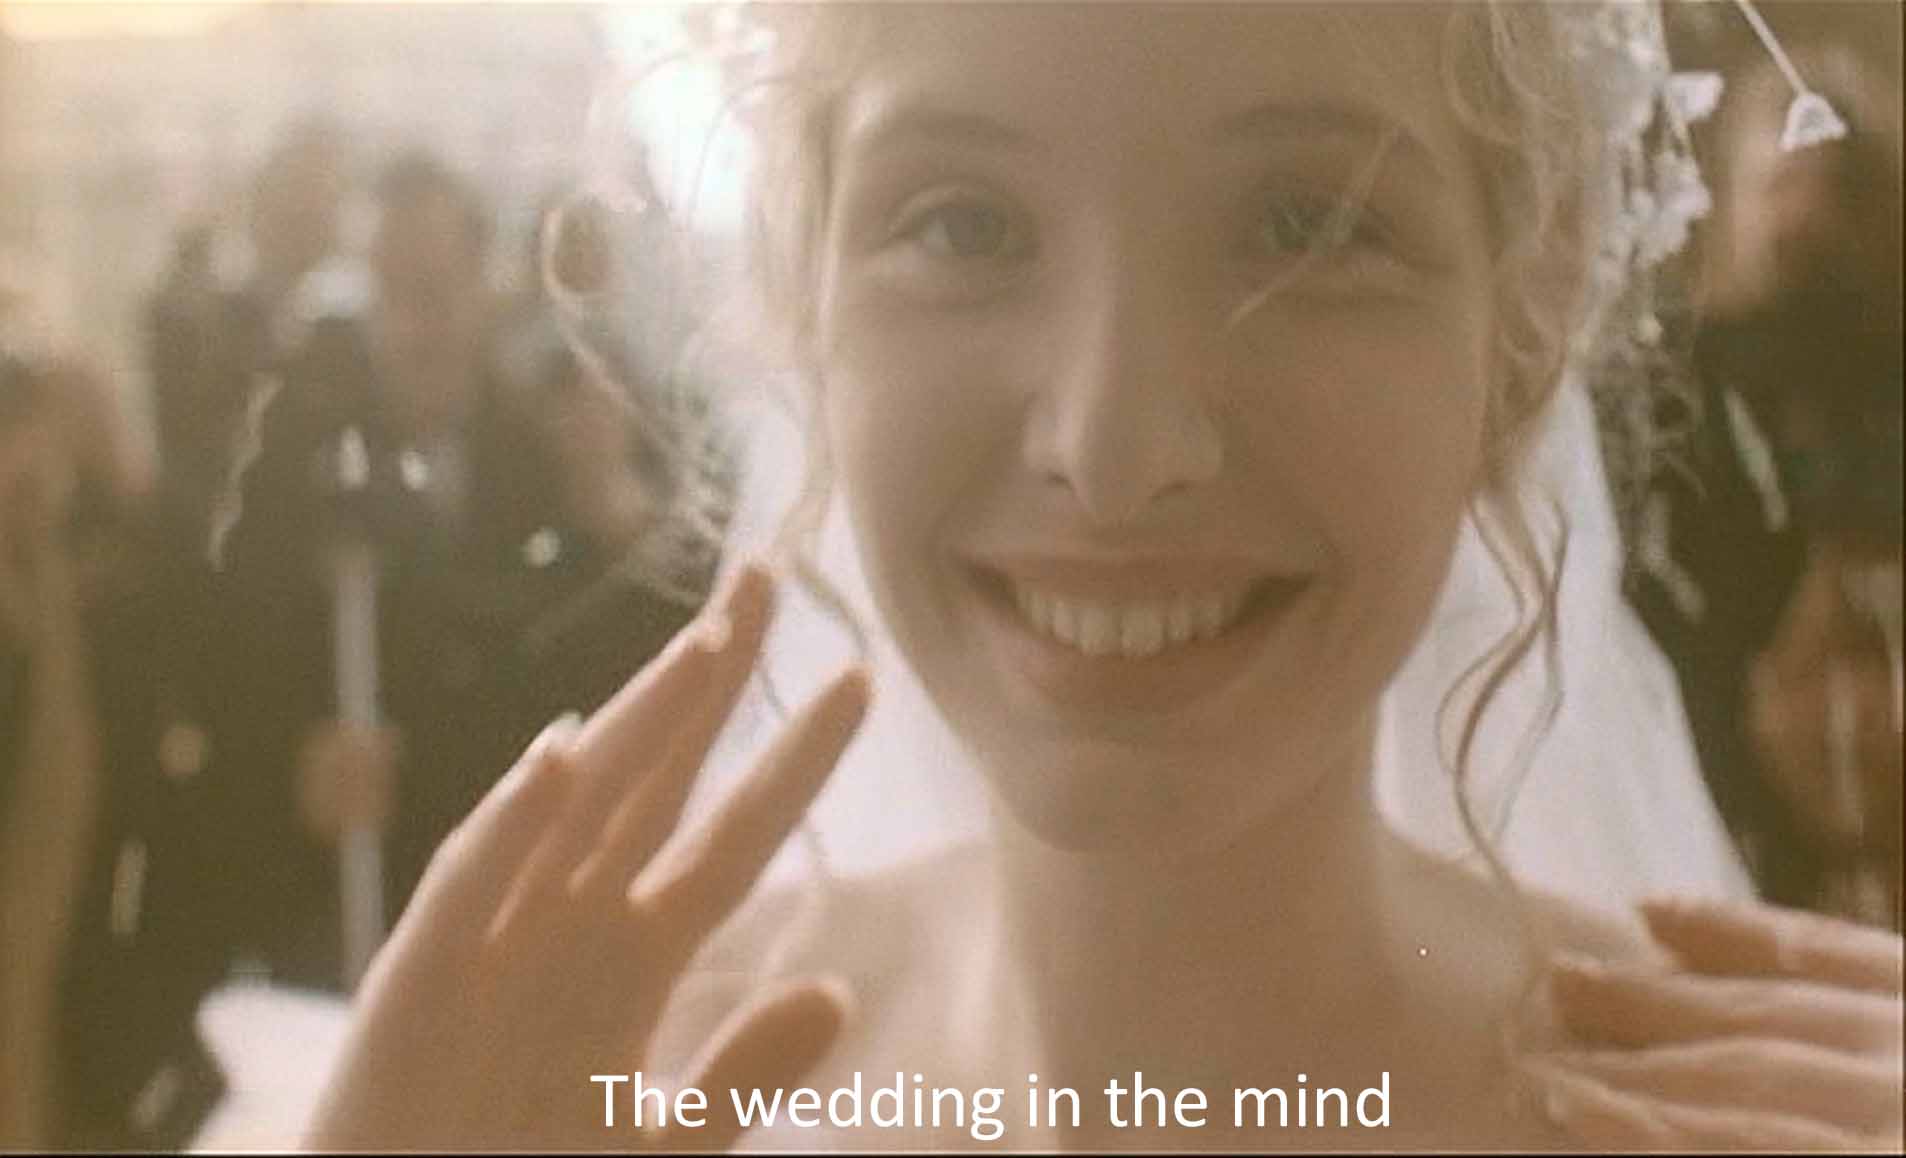 The wedding in the mind